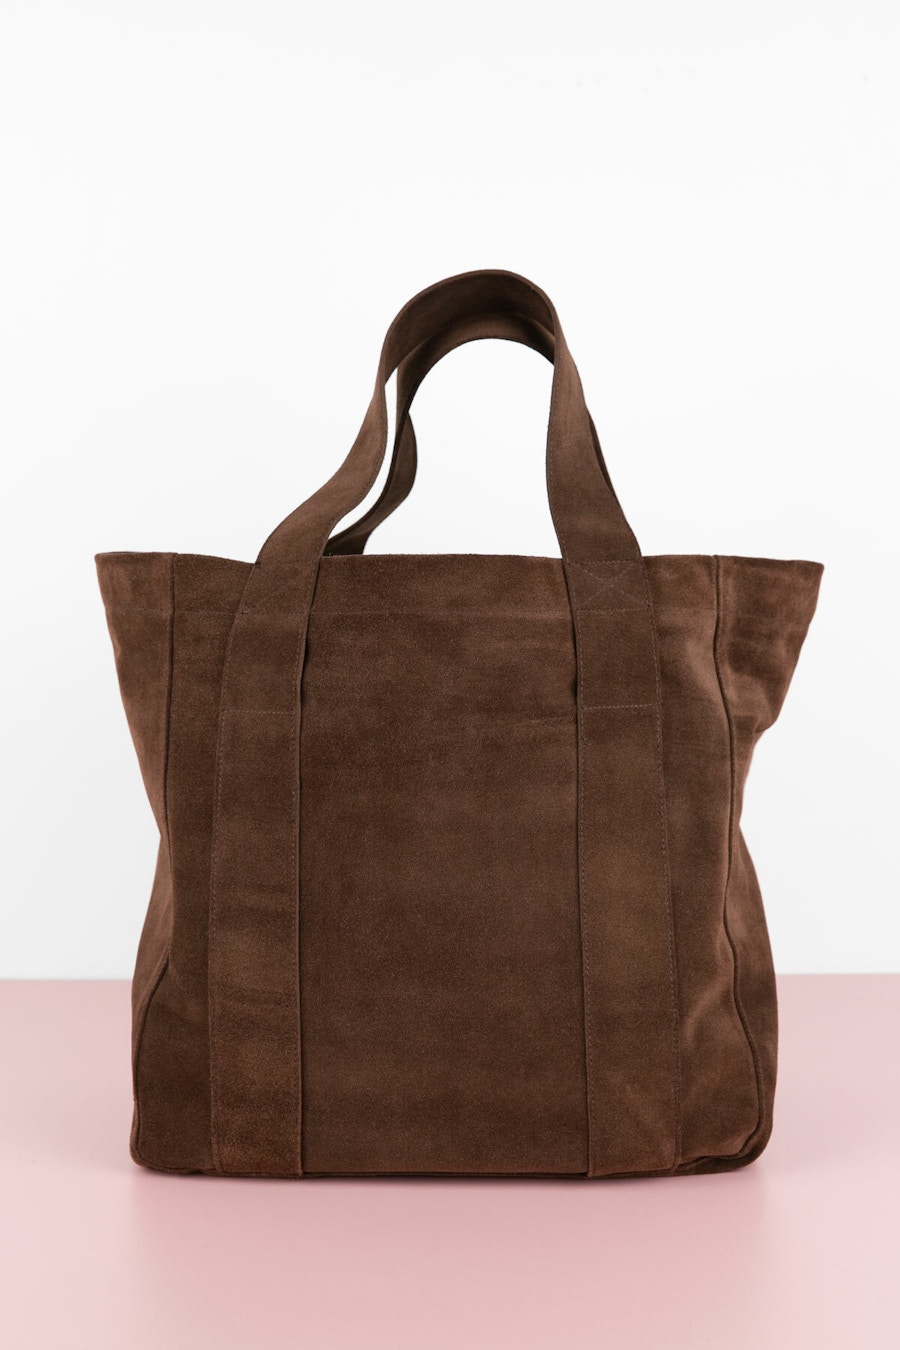 Leather Mule Tote The Fabric Store KATM Mule Tote